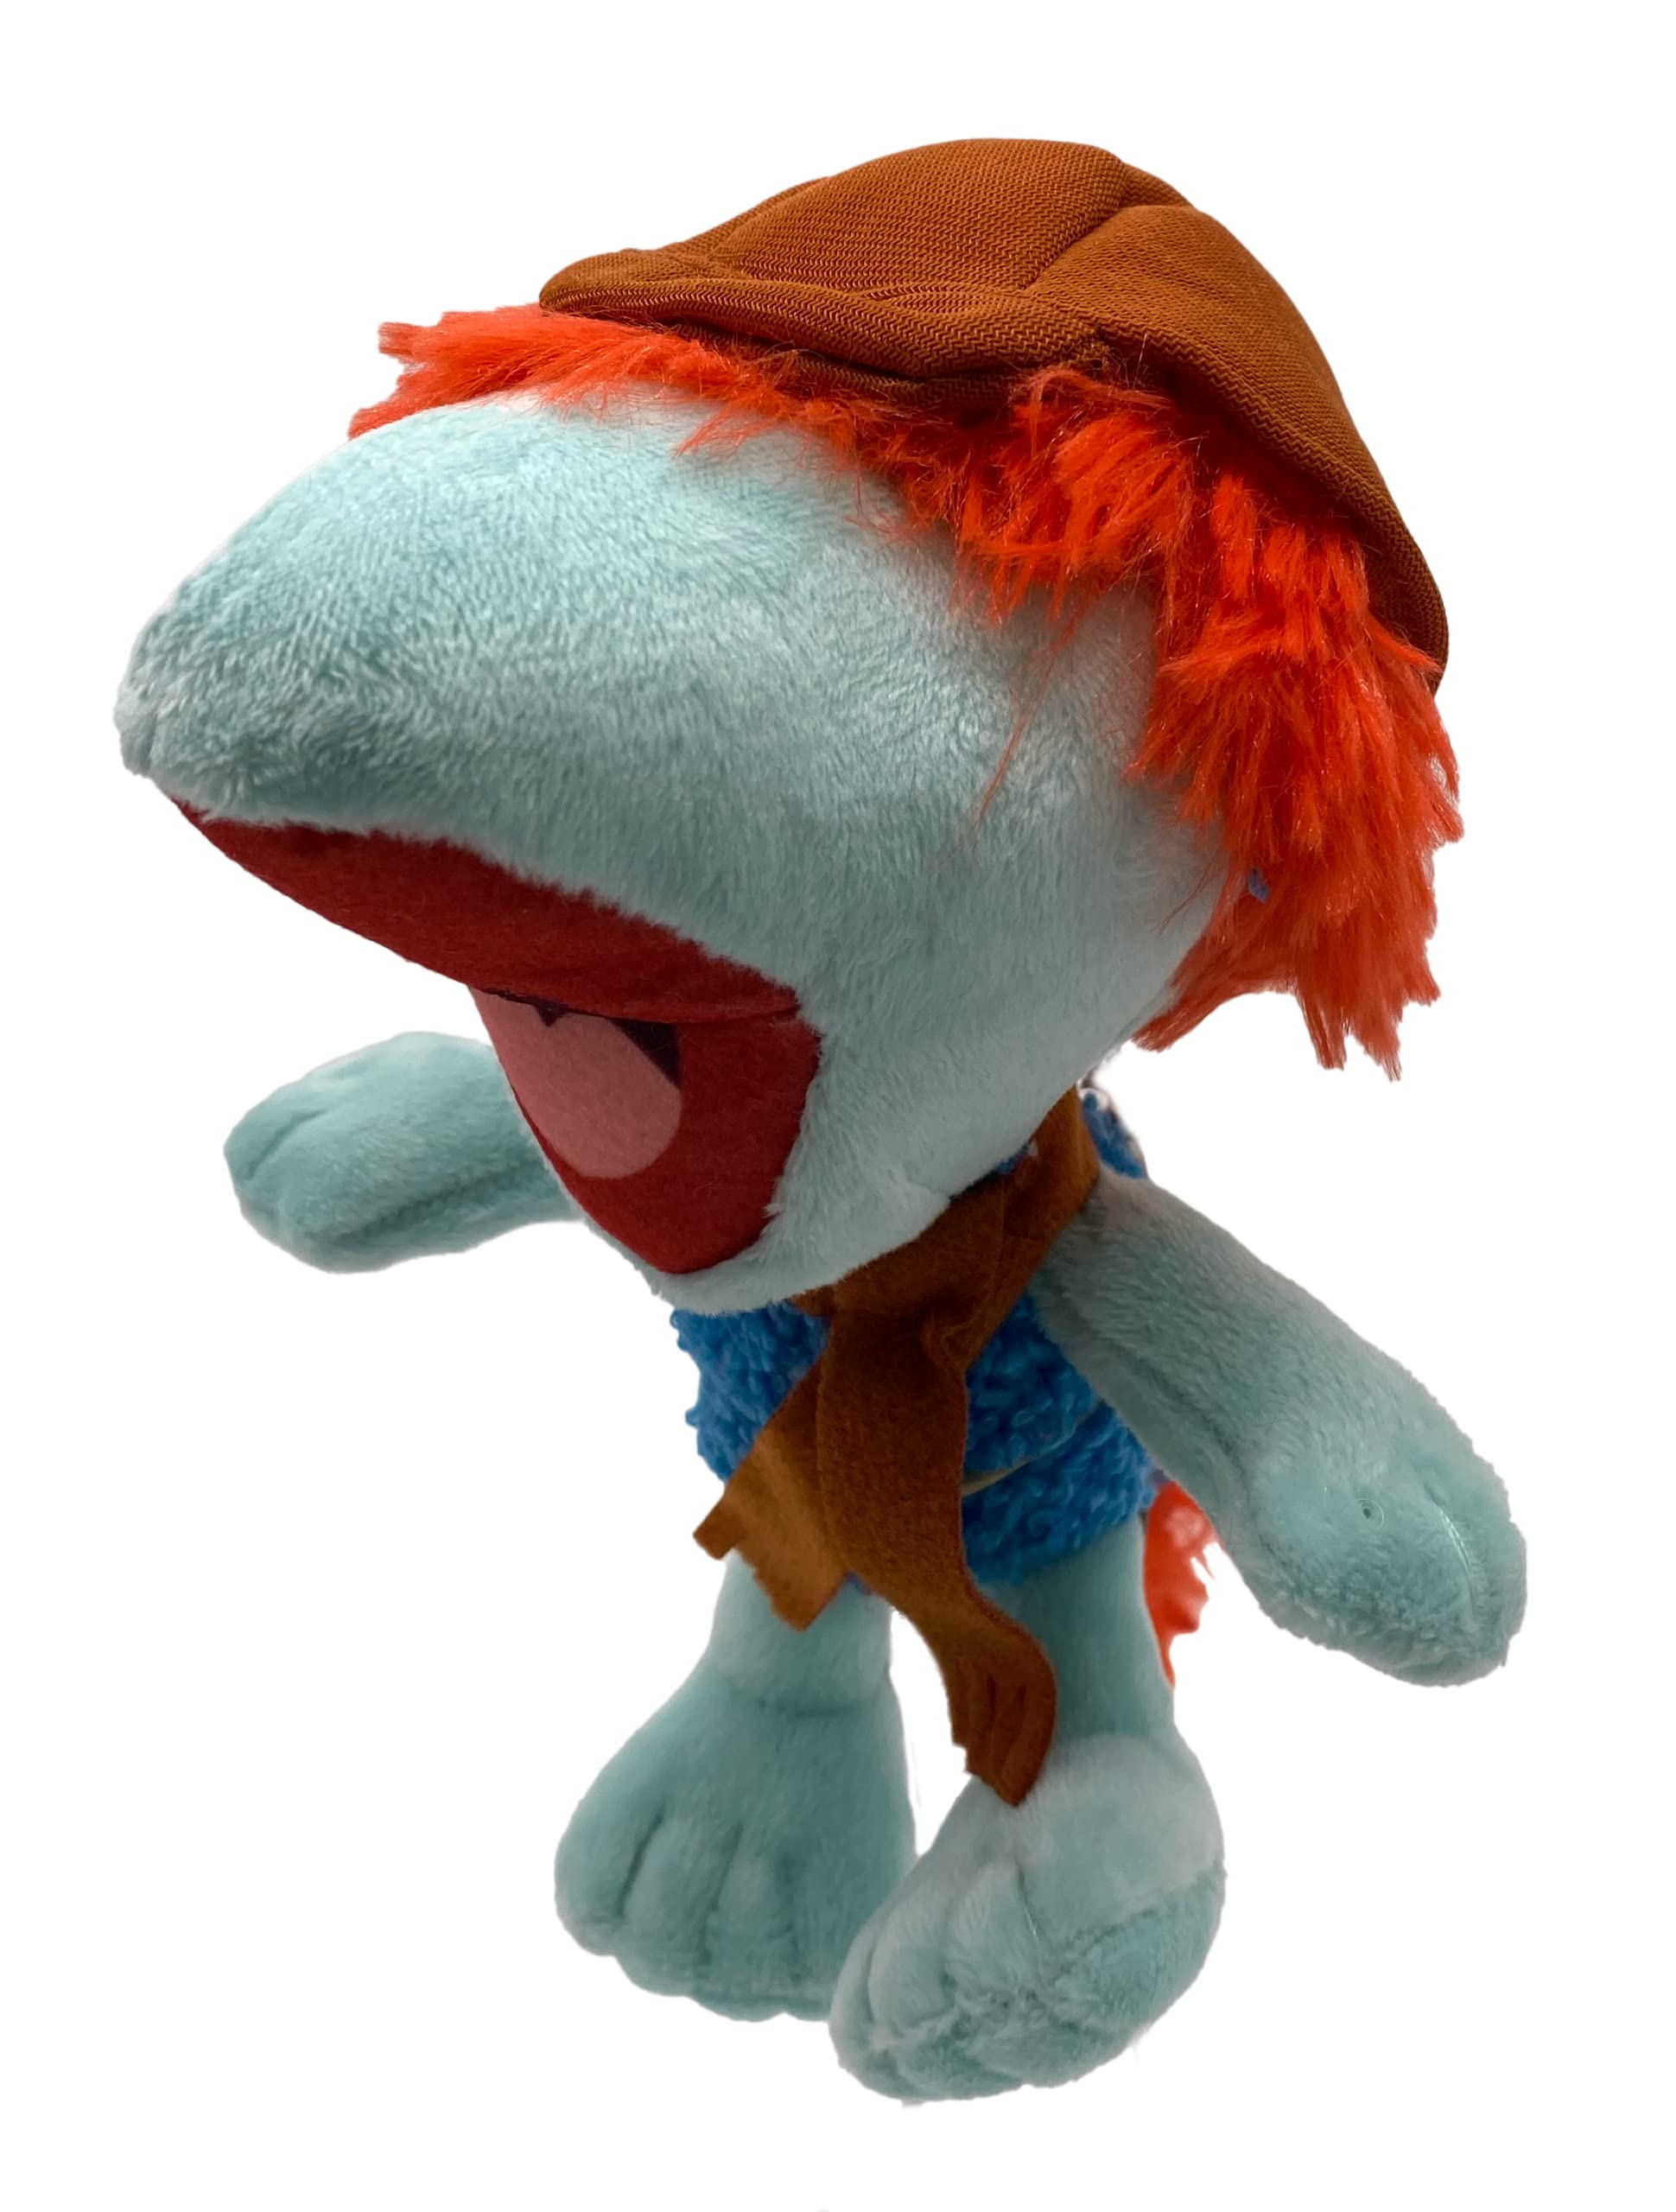 Boober Small Plush Toy 7.5" Fraggle Rock Stuffed Figure Apple TV+ Series for Fans of All Ages